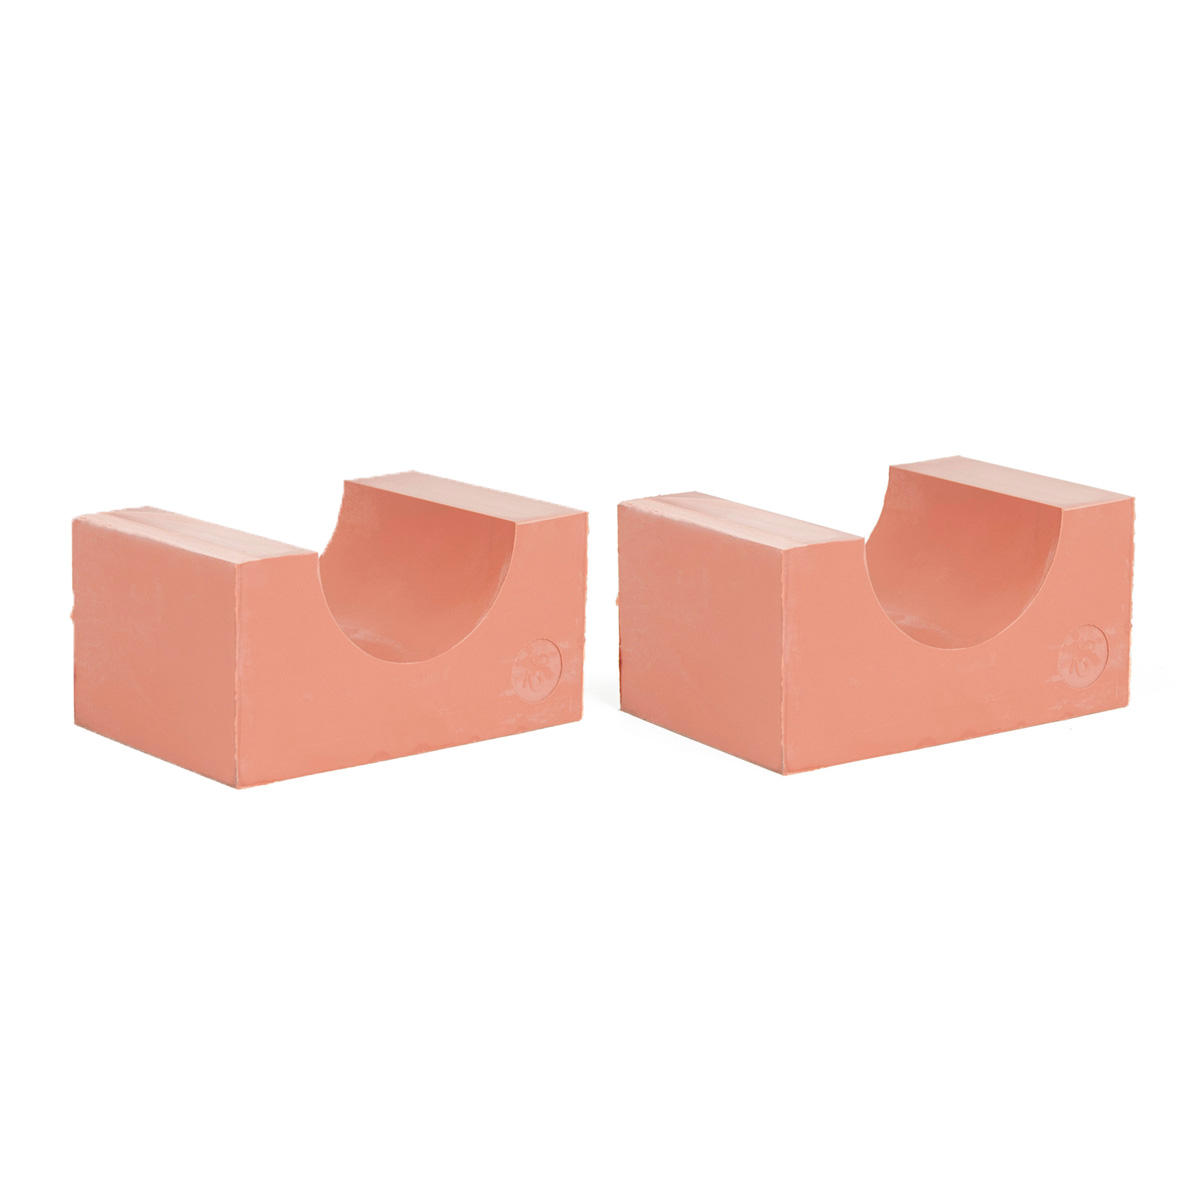 90-52*2 Set of 2 half insert block lycron, 90-52 for cable/pipe diam. 51.5-53.5mm